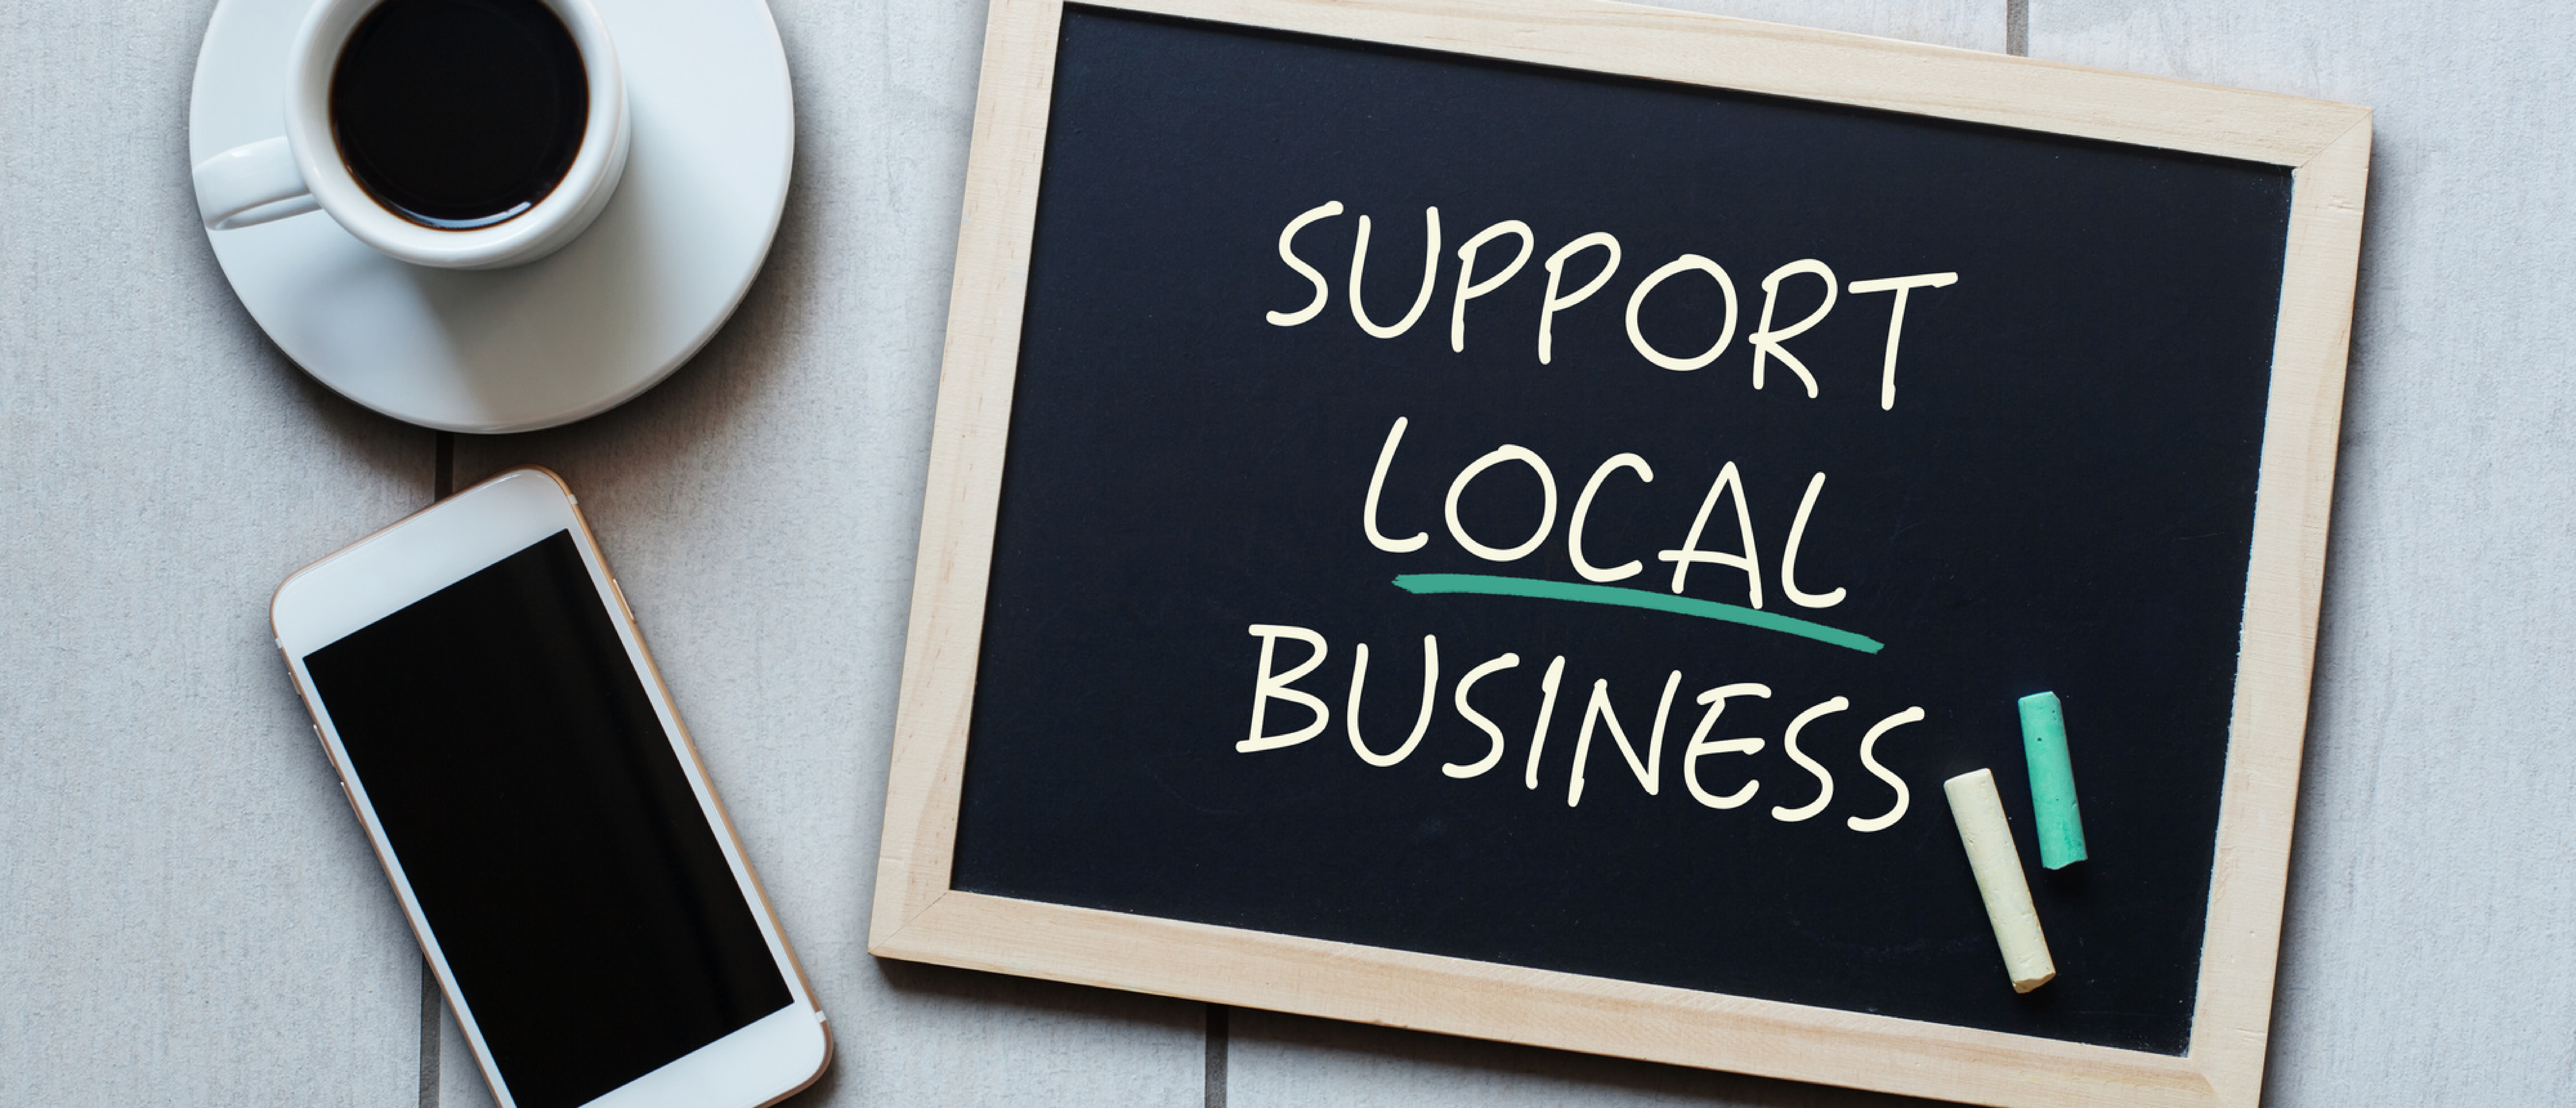 support local business - Communication & Events